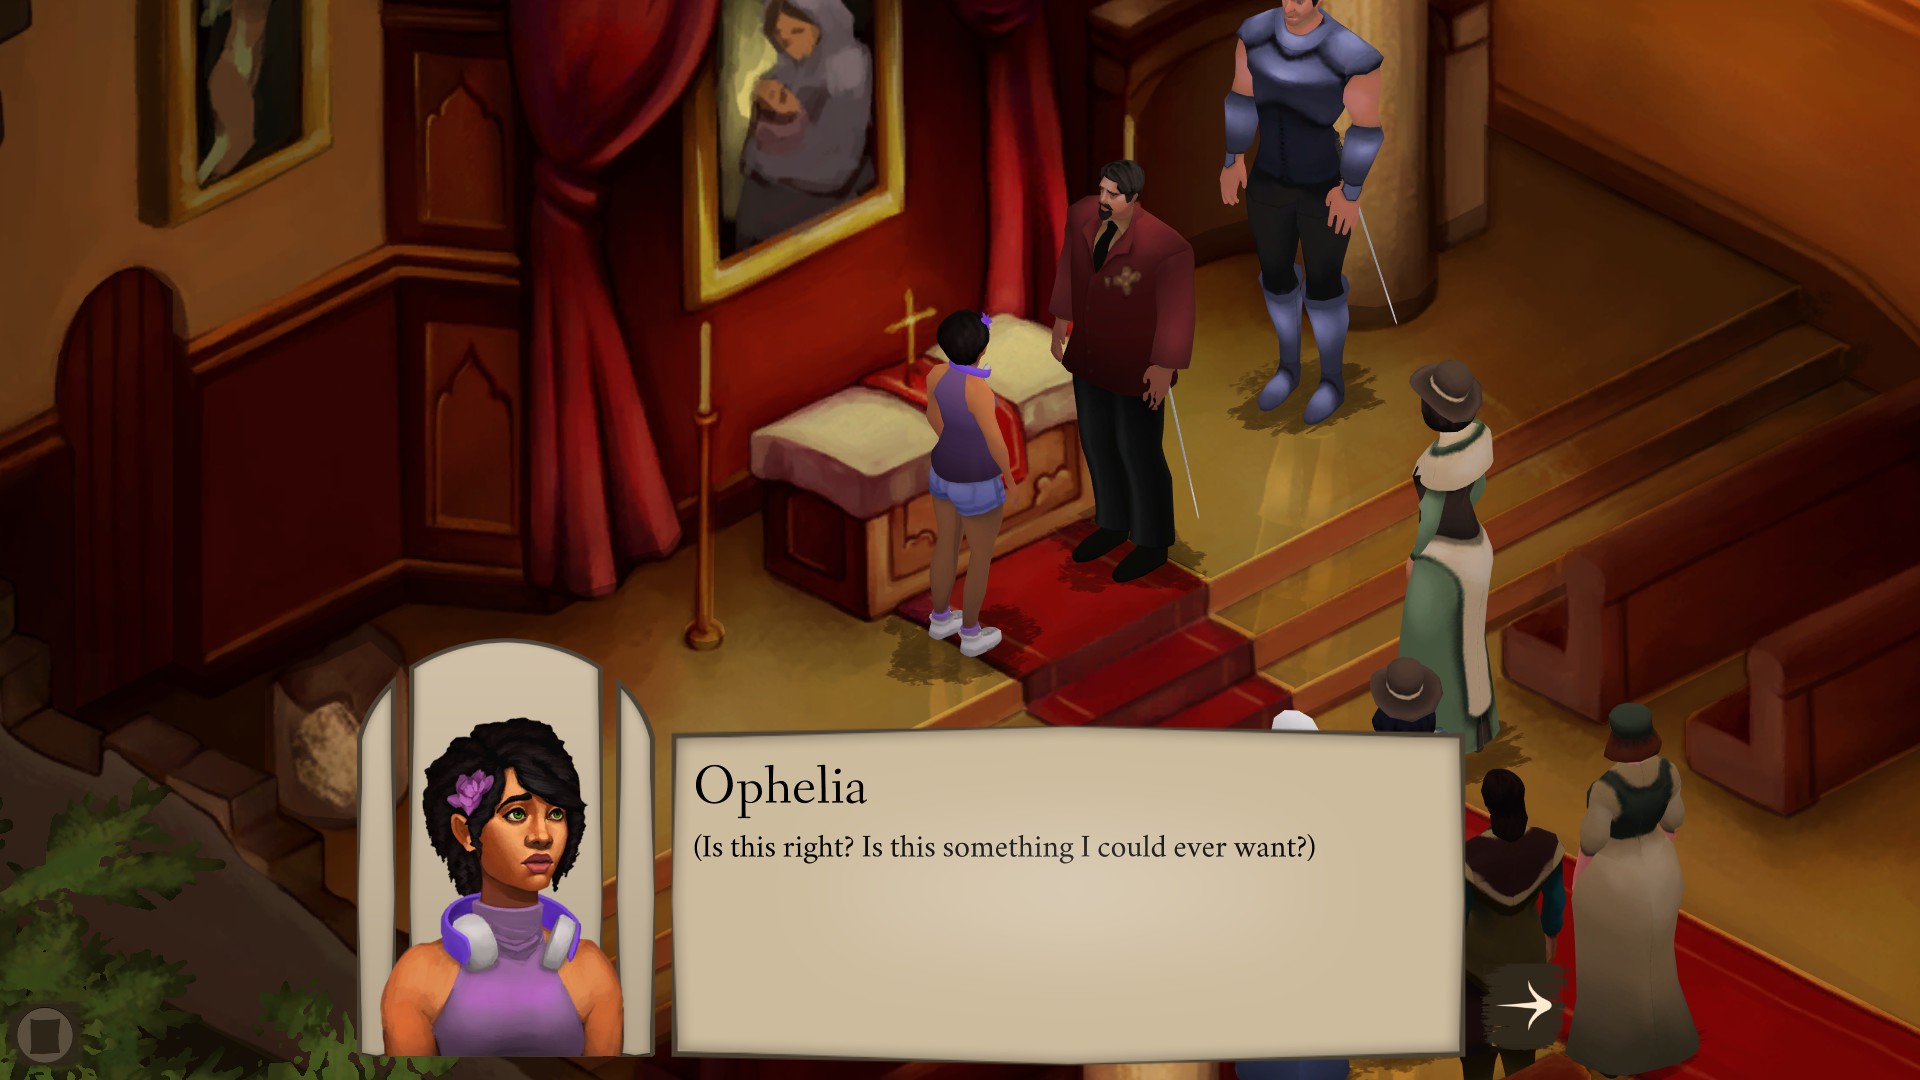 Screenshot from Elsinore, where a young Ophelia stands in front of an altar with a cross and next to a very large and imposing man, asking herself "Is this right? Is this something I could ever want?"